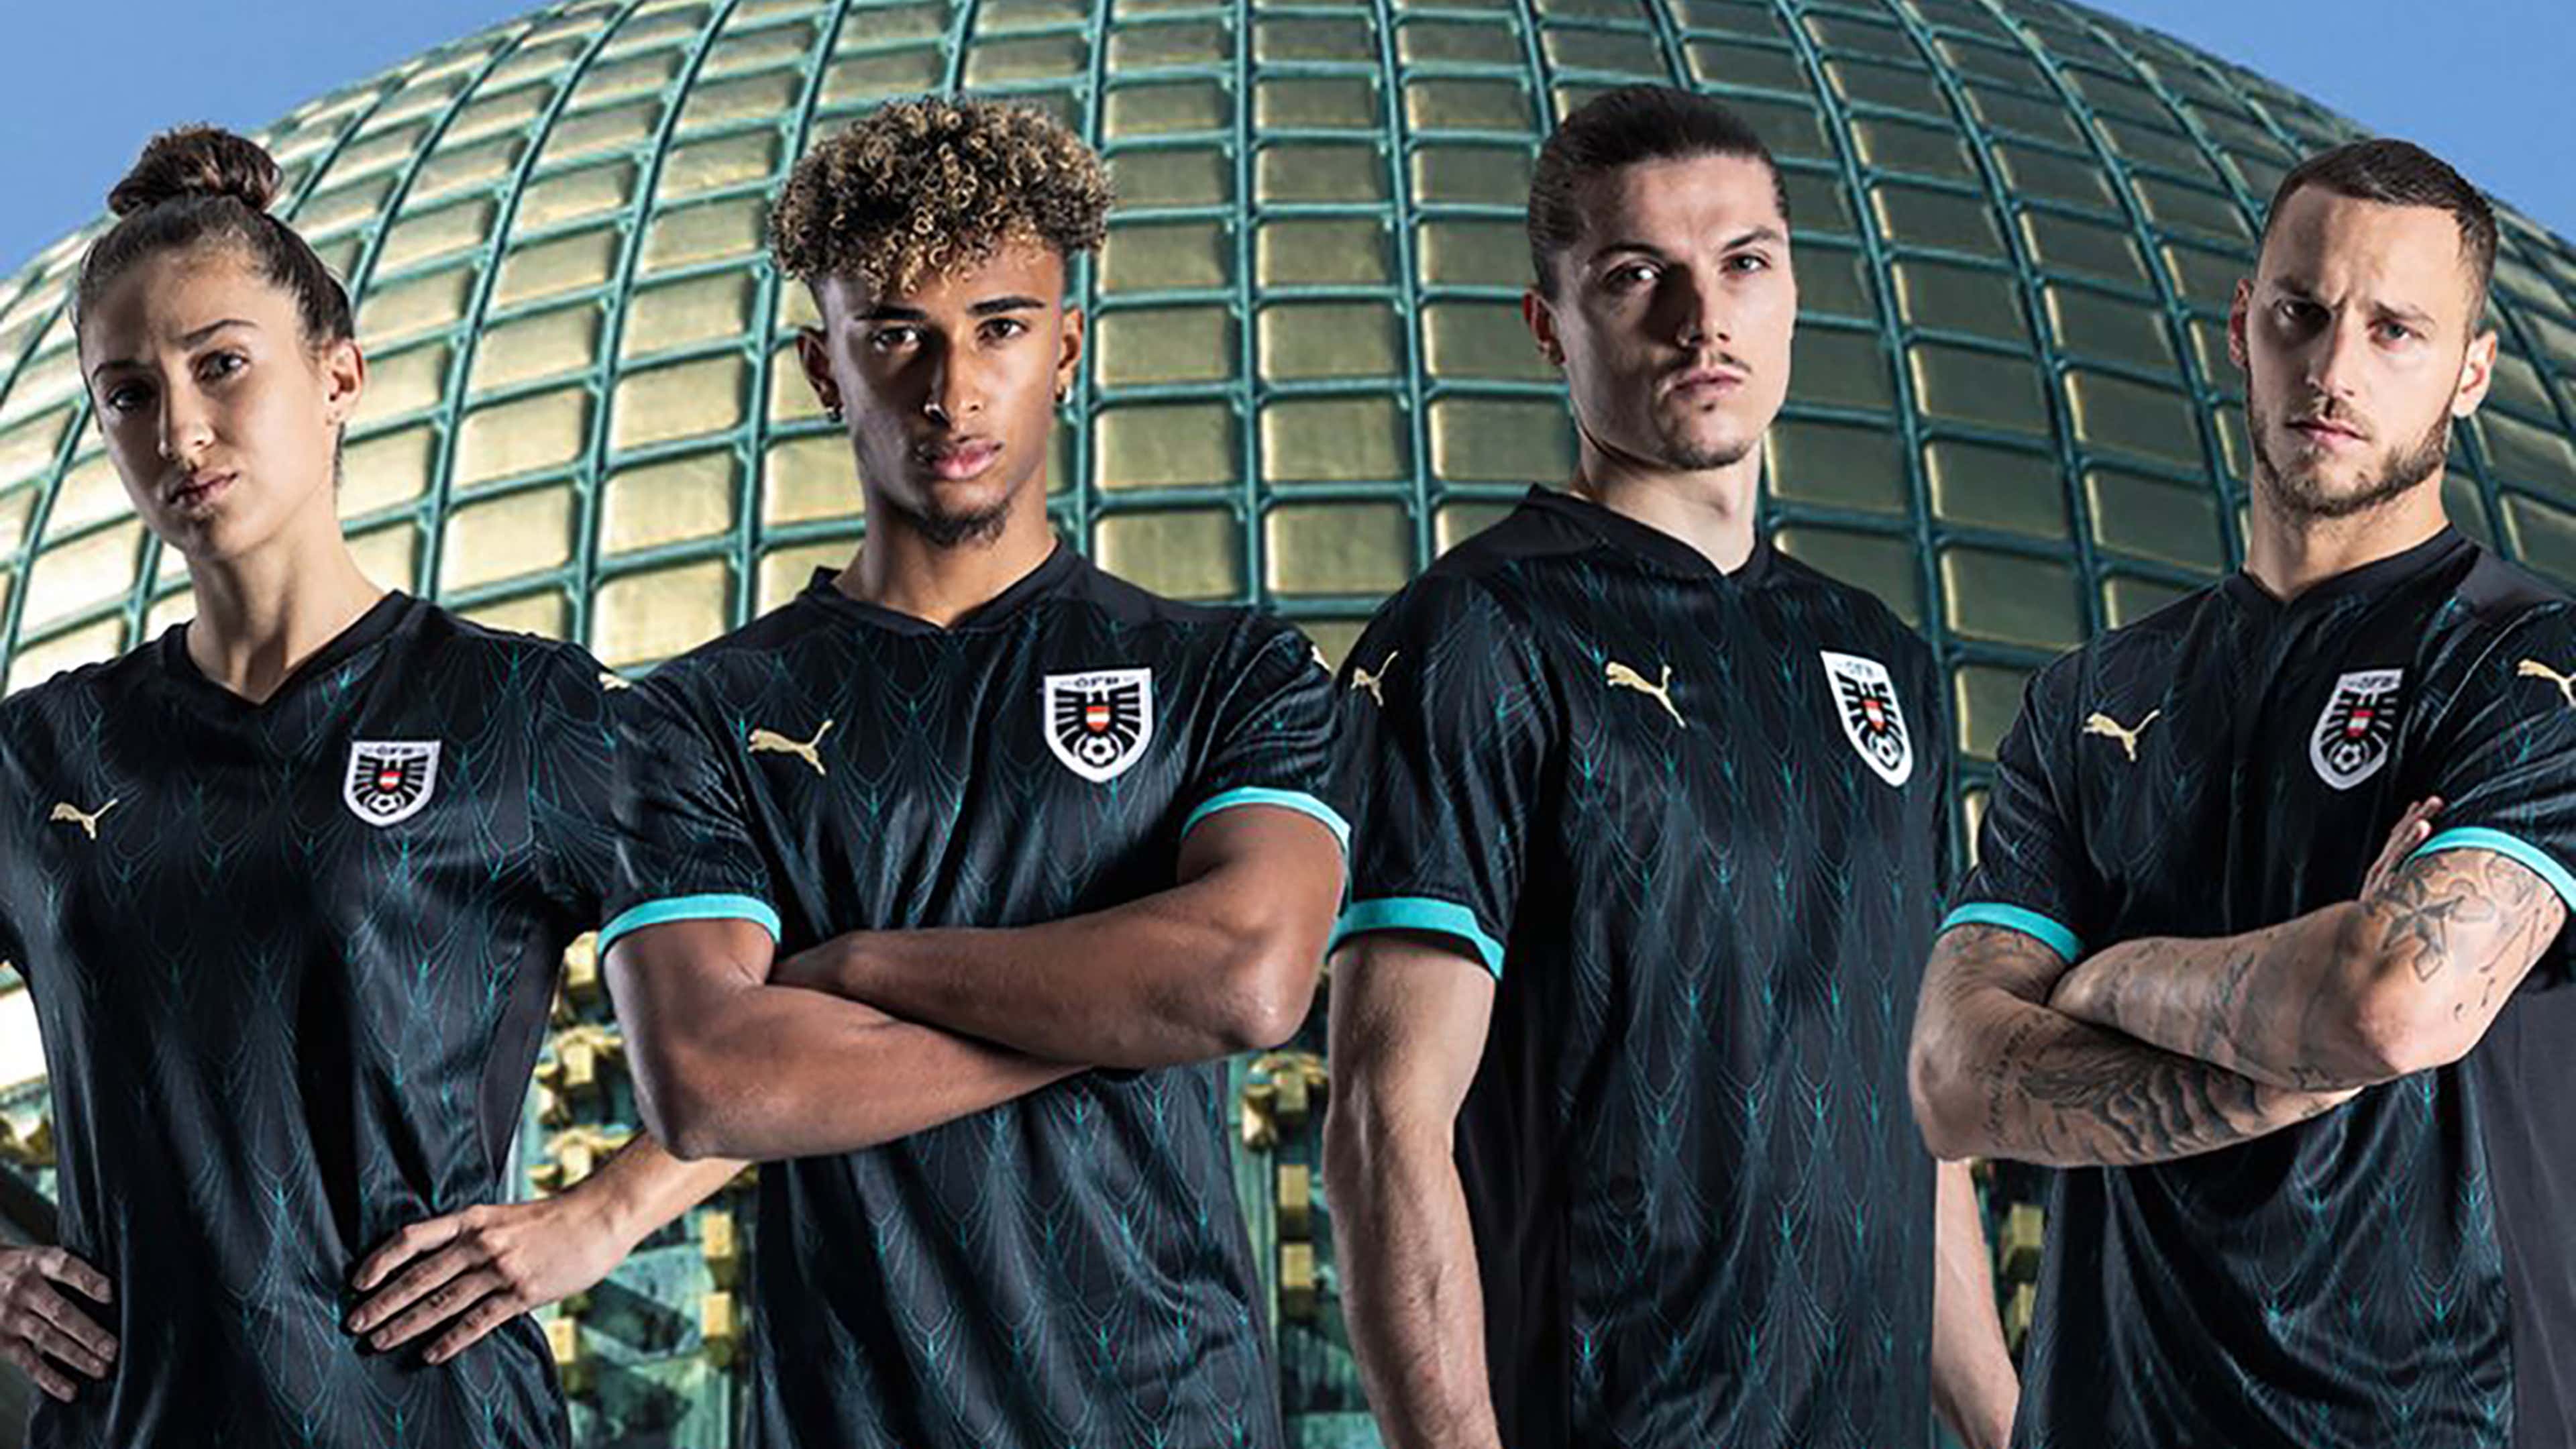 Euro 2020 kits: England, France, Portugal & what all the teams